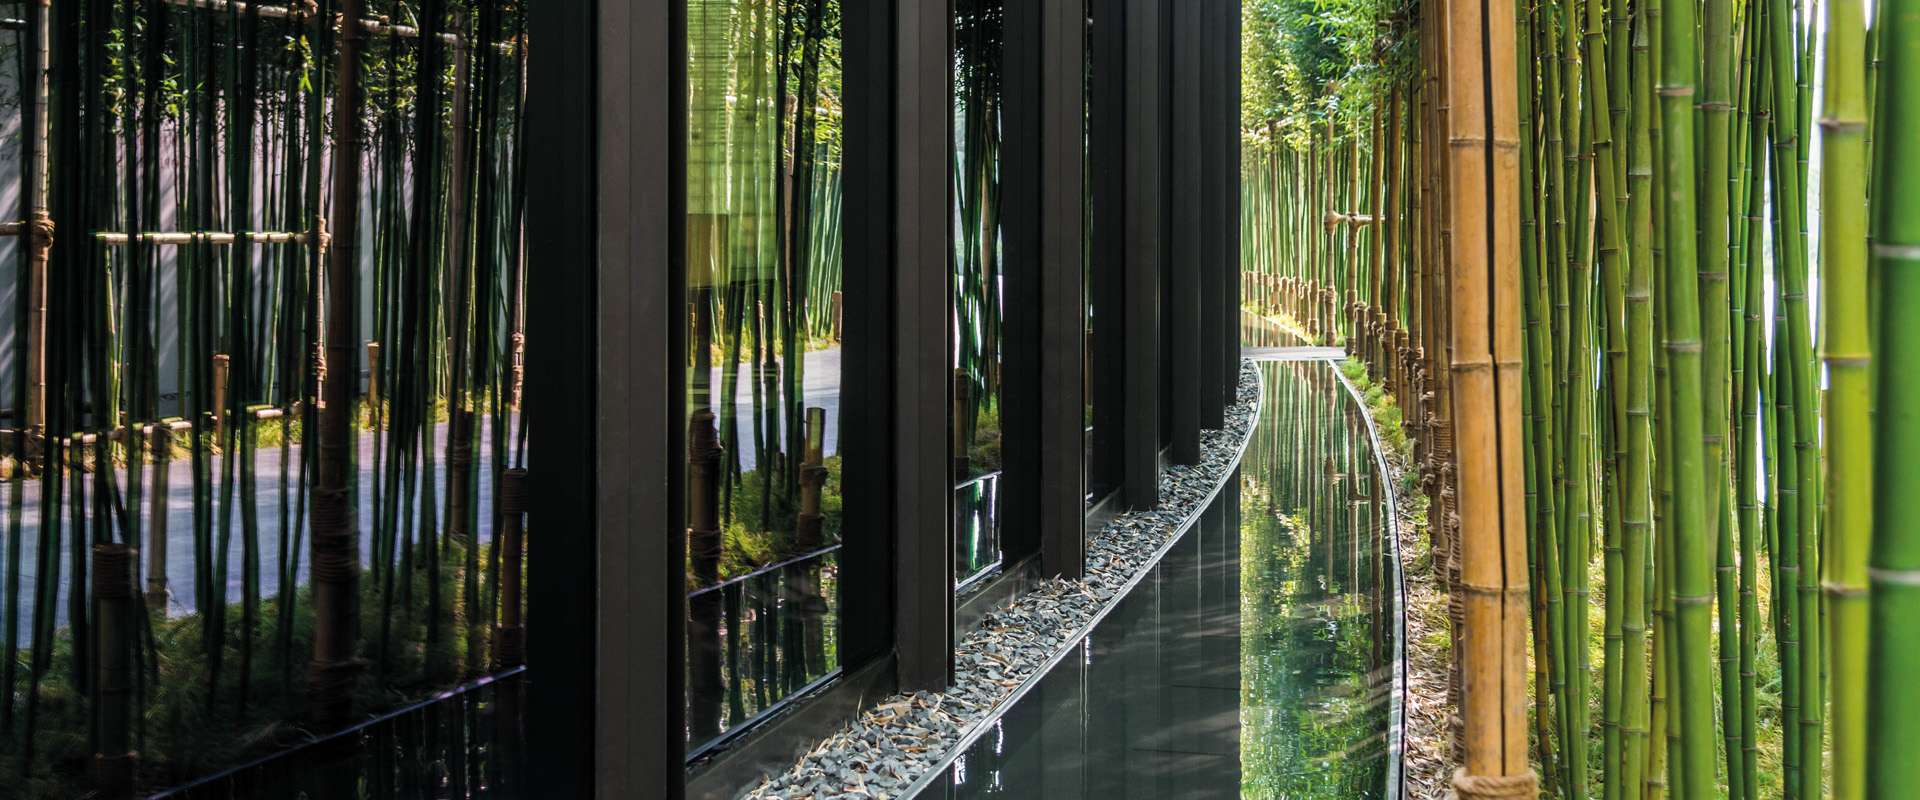 The Bvlgari Hotel Beijing Overview and Design